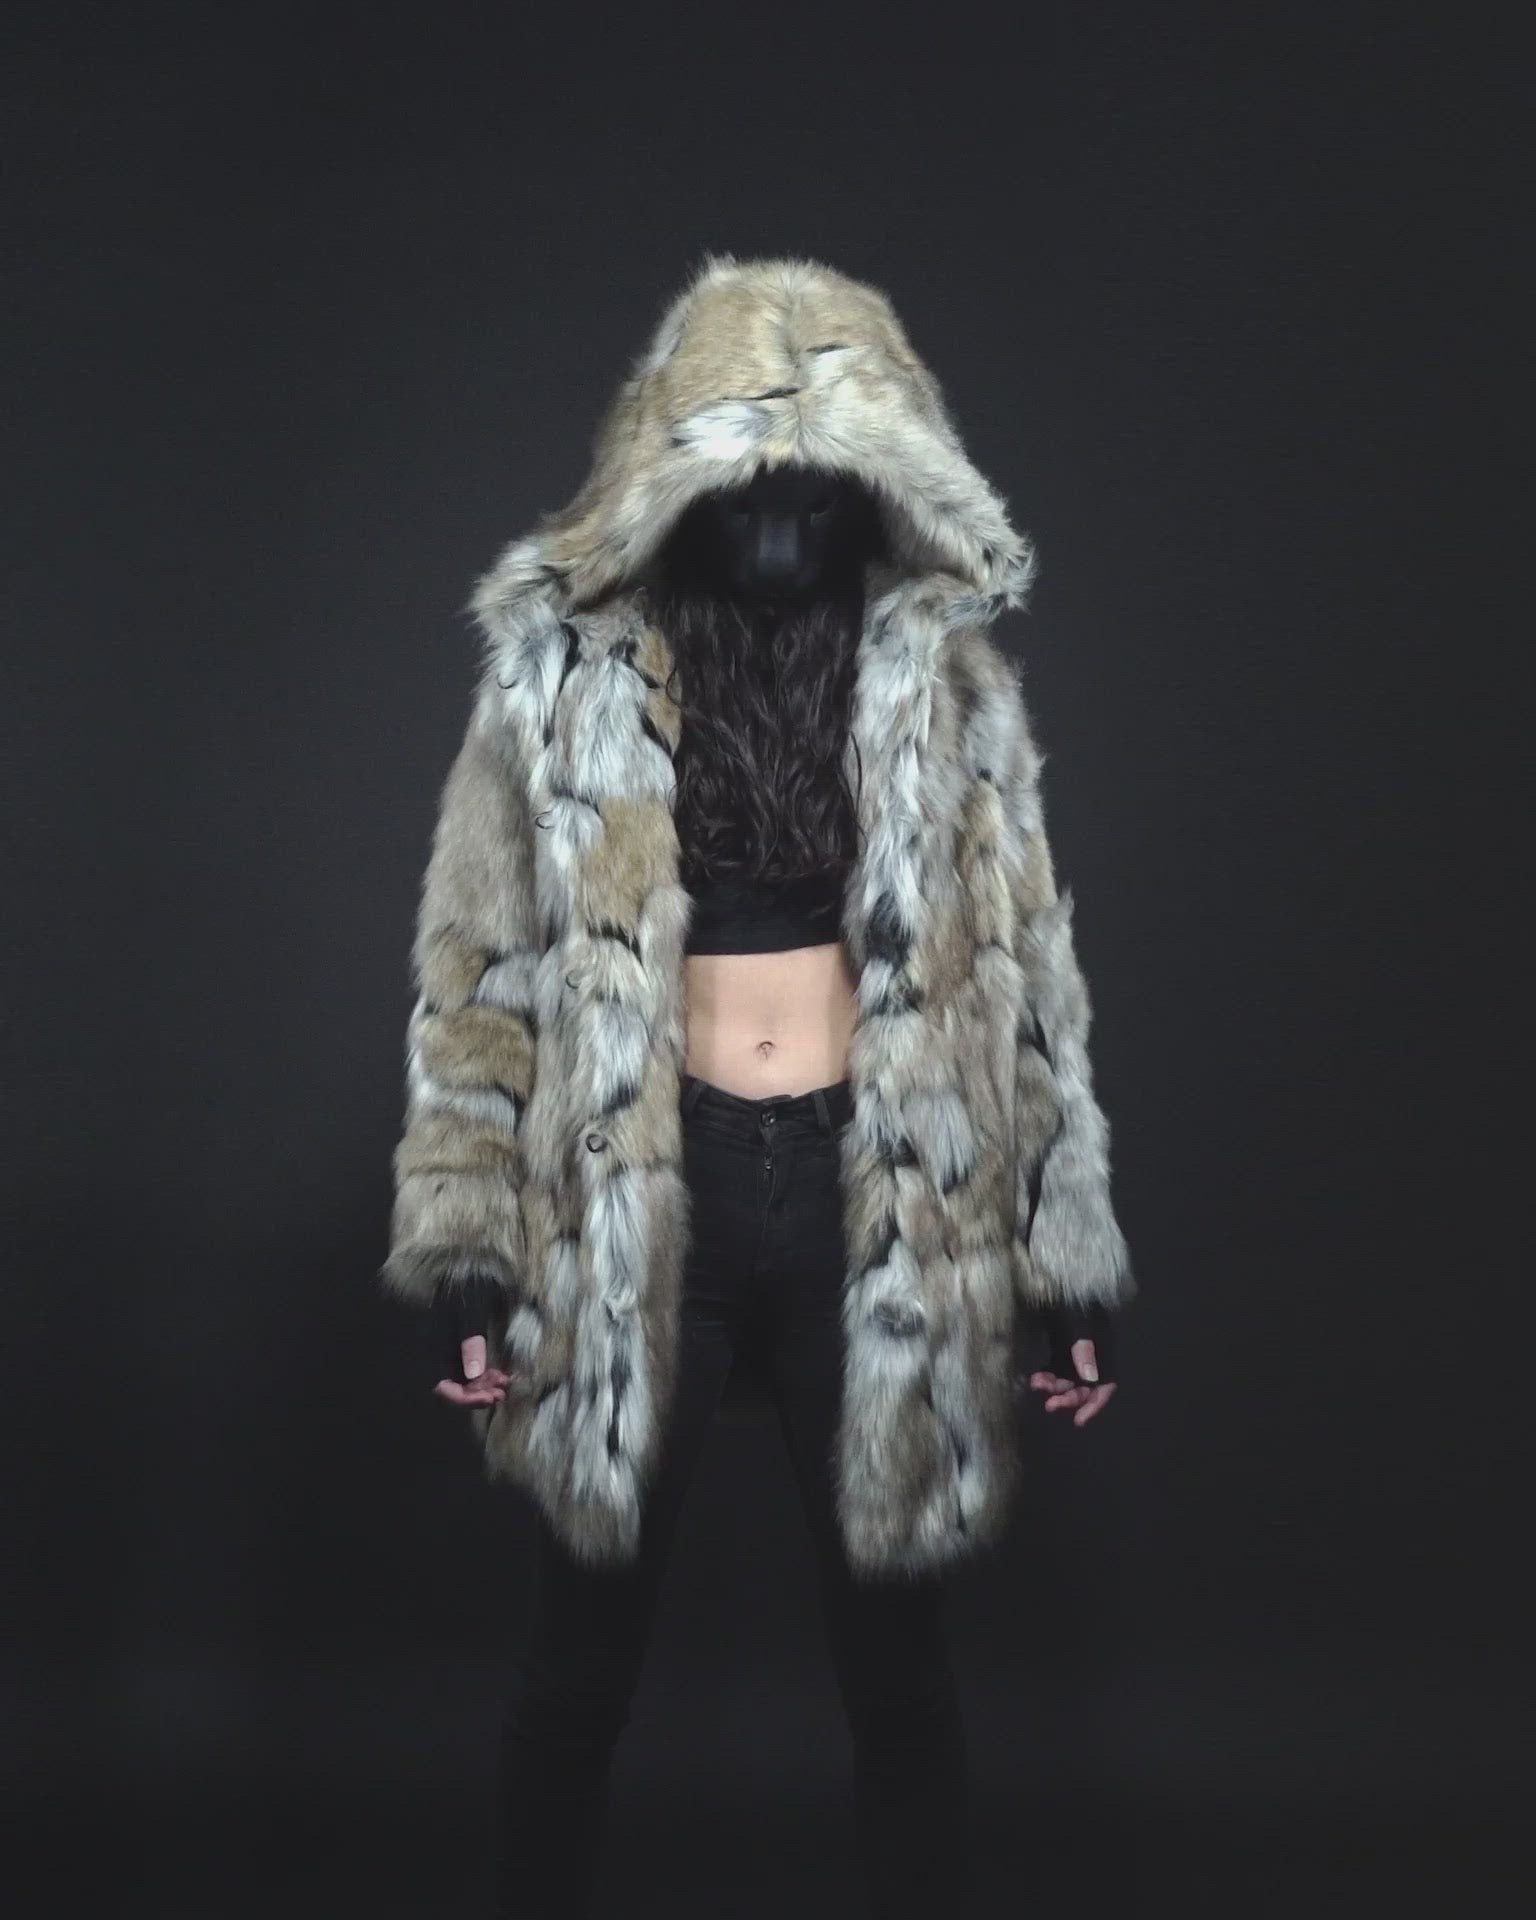 Video of Model in Mask Demonstrating the Features of the Men's Wolverine Faux Fur Coaat with Hood